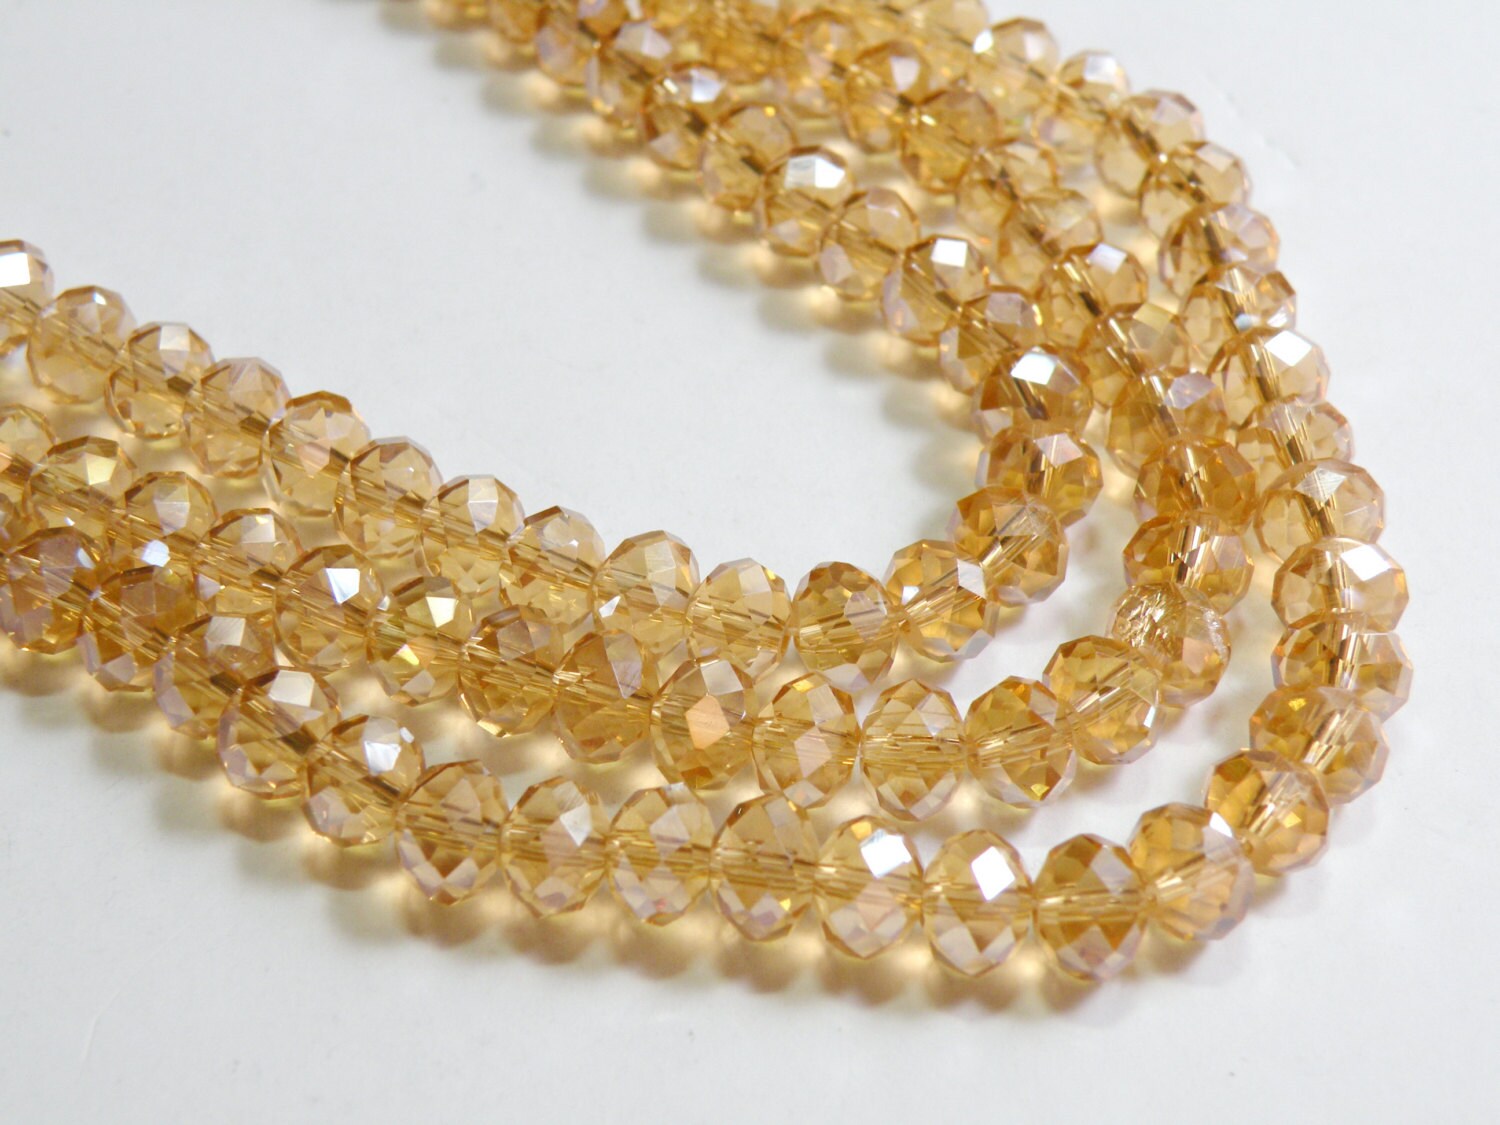 Golden Champagne AB faceted glass rondelle beads 8x6mm full | Etsy